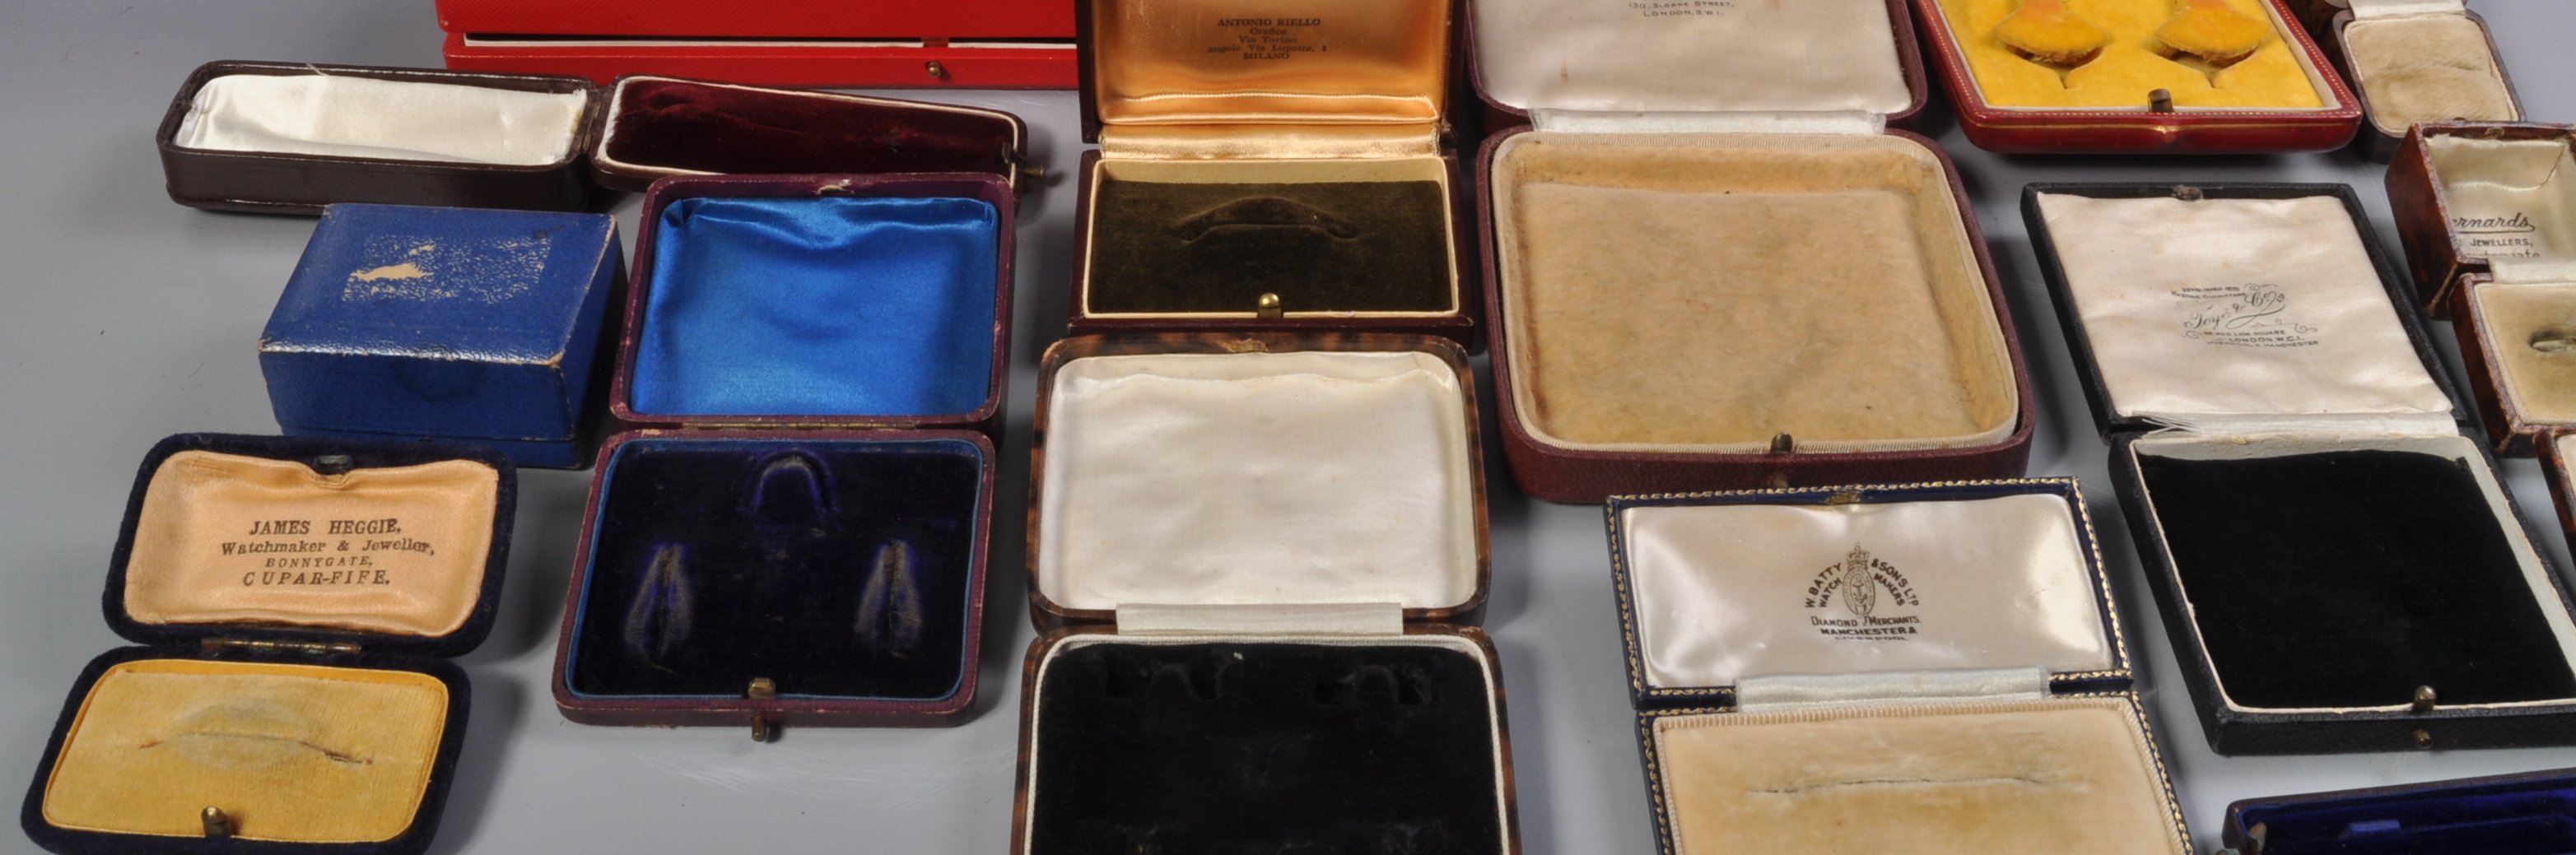 GROUP OF VICTORIAN AND LATER JEWELLERY BOXES - Image 5 of 6